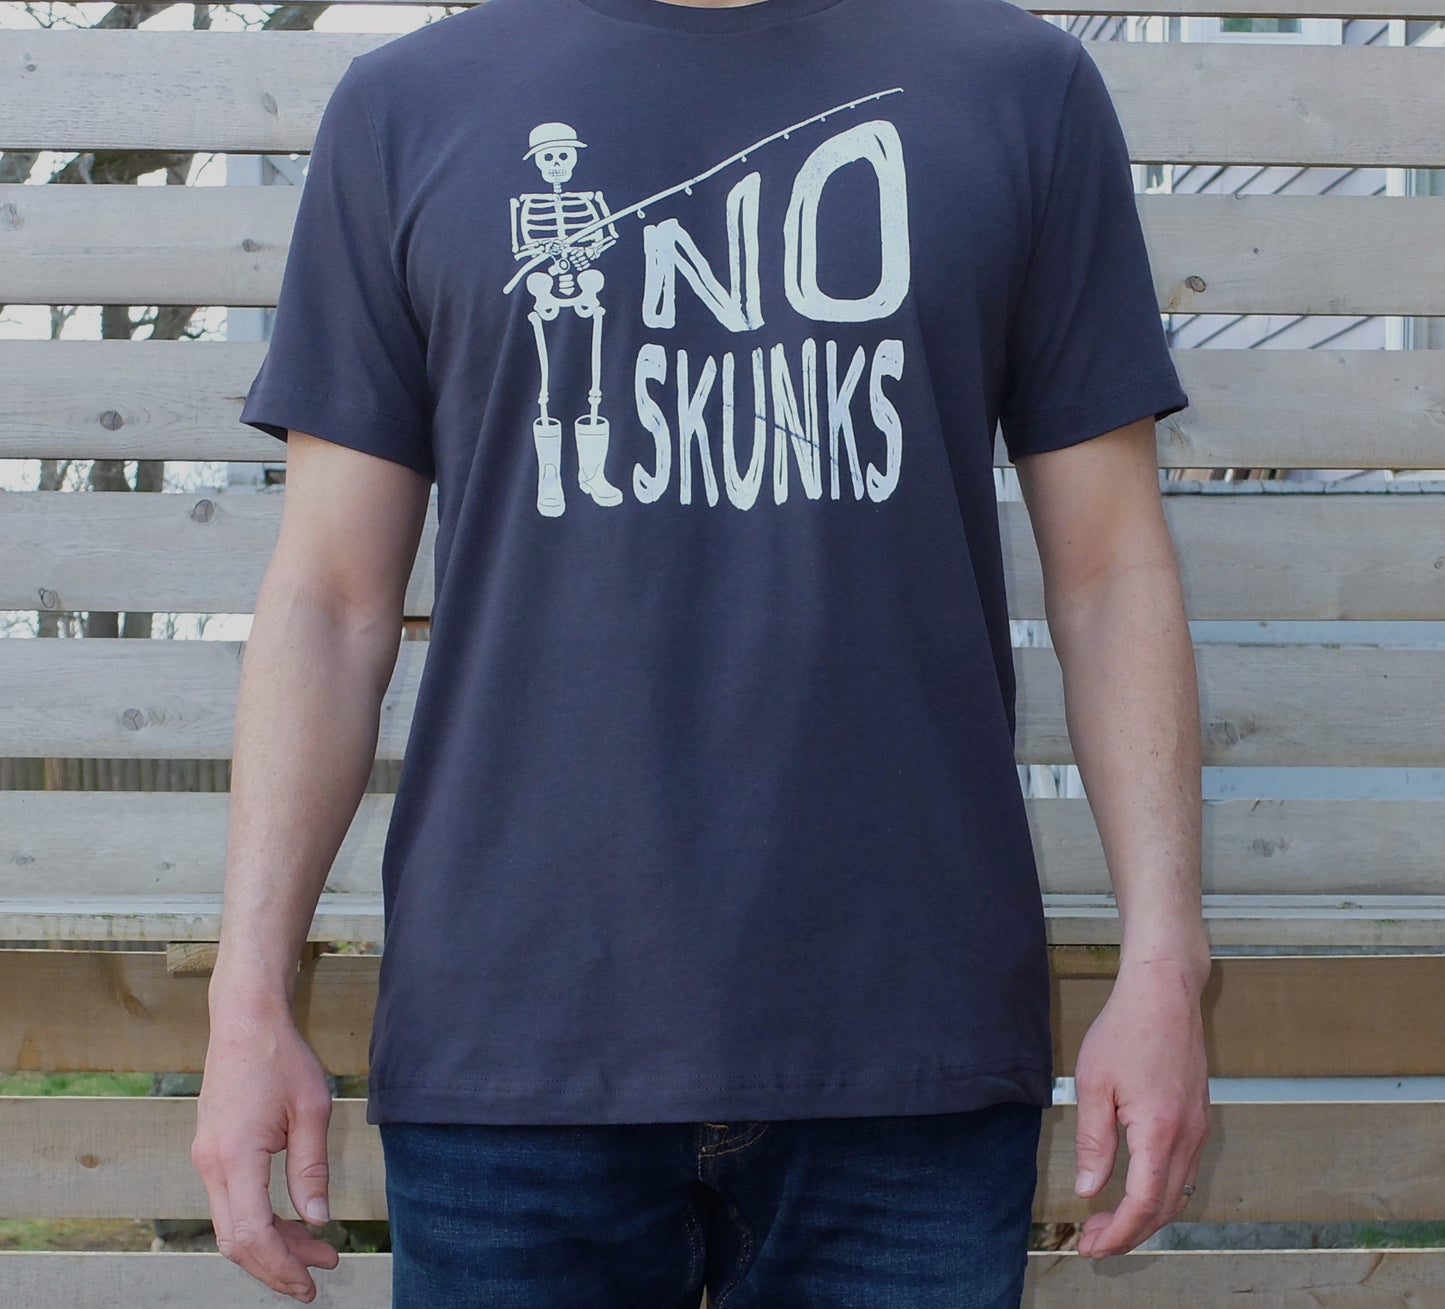 man wearing dark grey cotton t-shirt with white skeleton fisherman graphic and No Skunks text